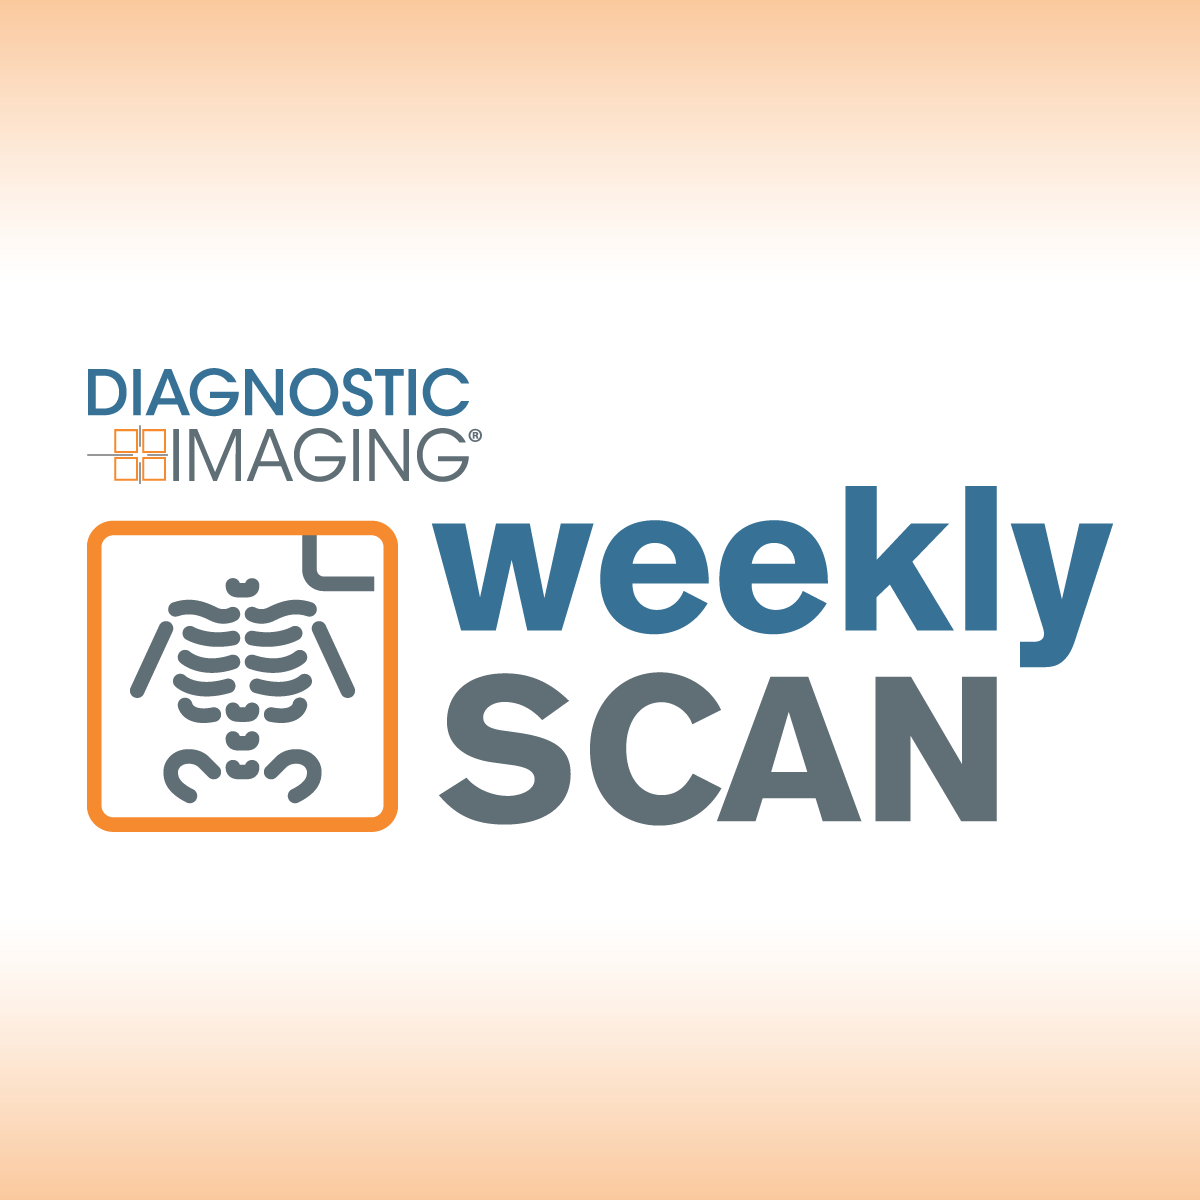 Diagnostic Imaging's Weekly Scan: February 18-February 24